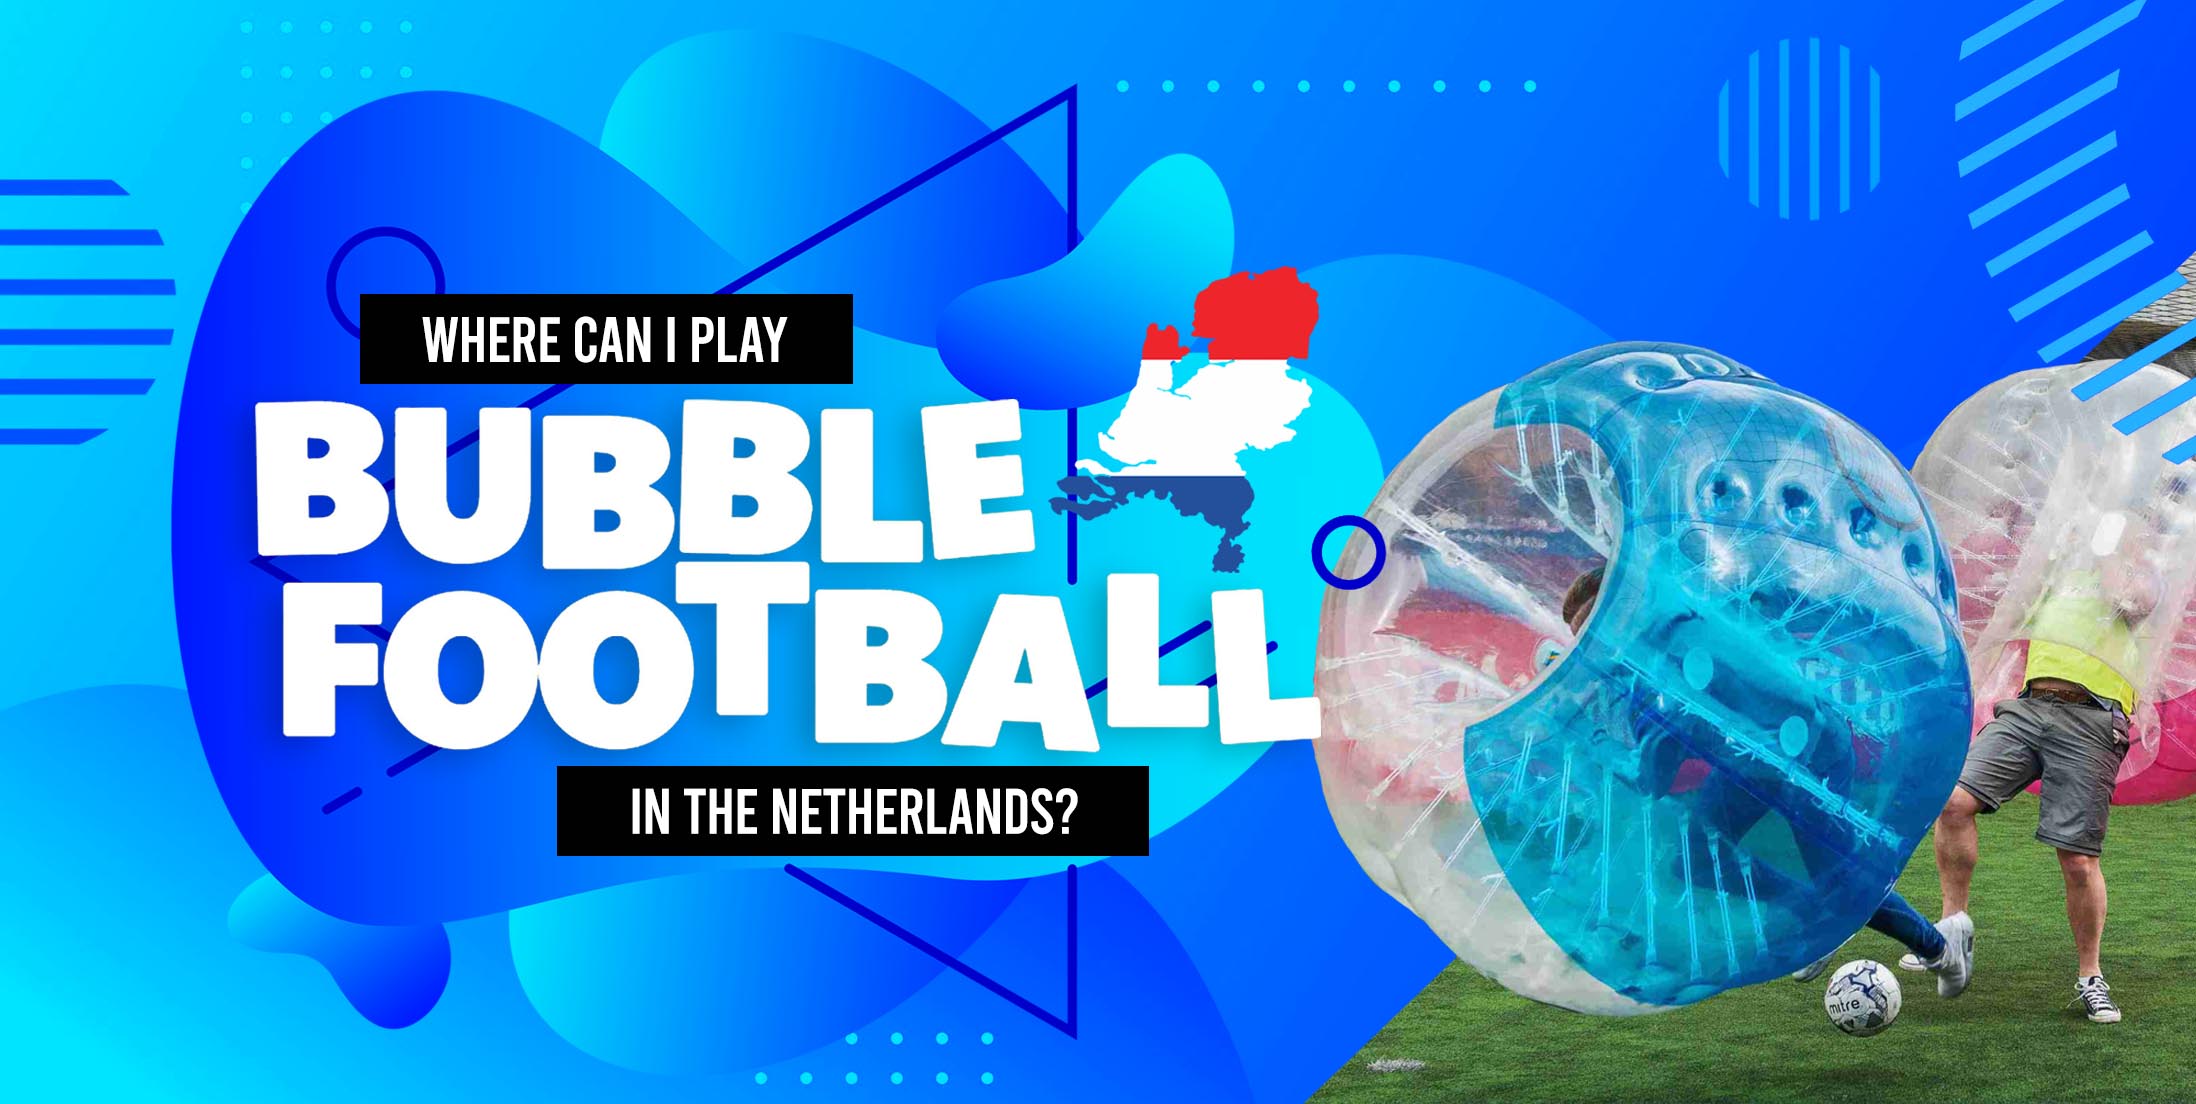 Where Can I Play Bubble Football in the Netherlands?